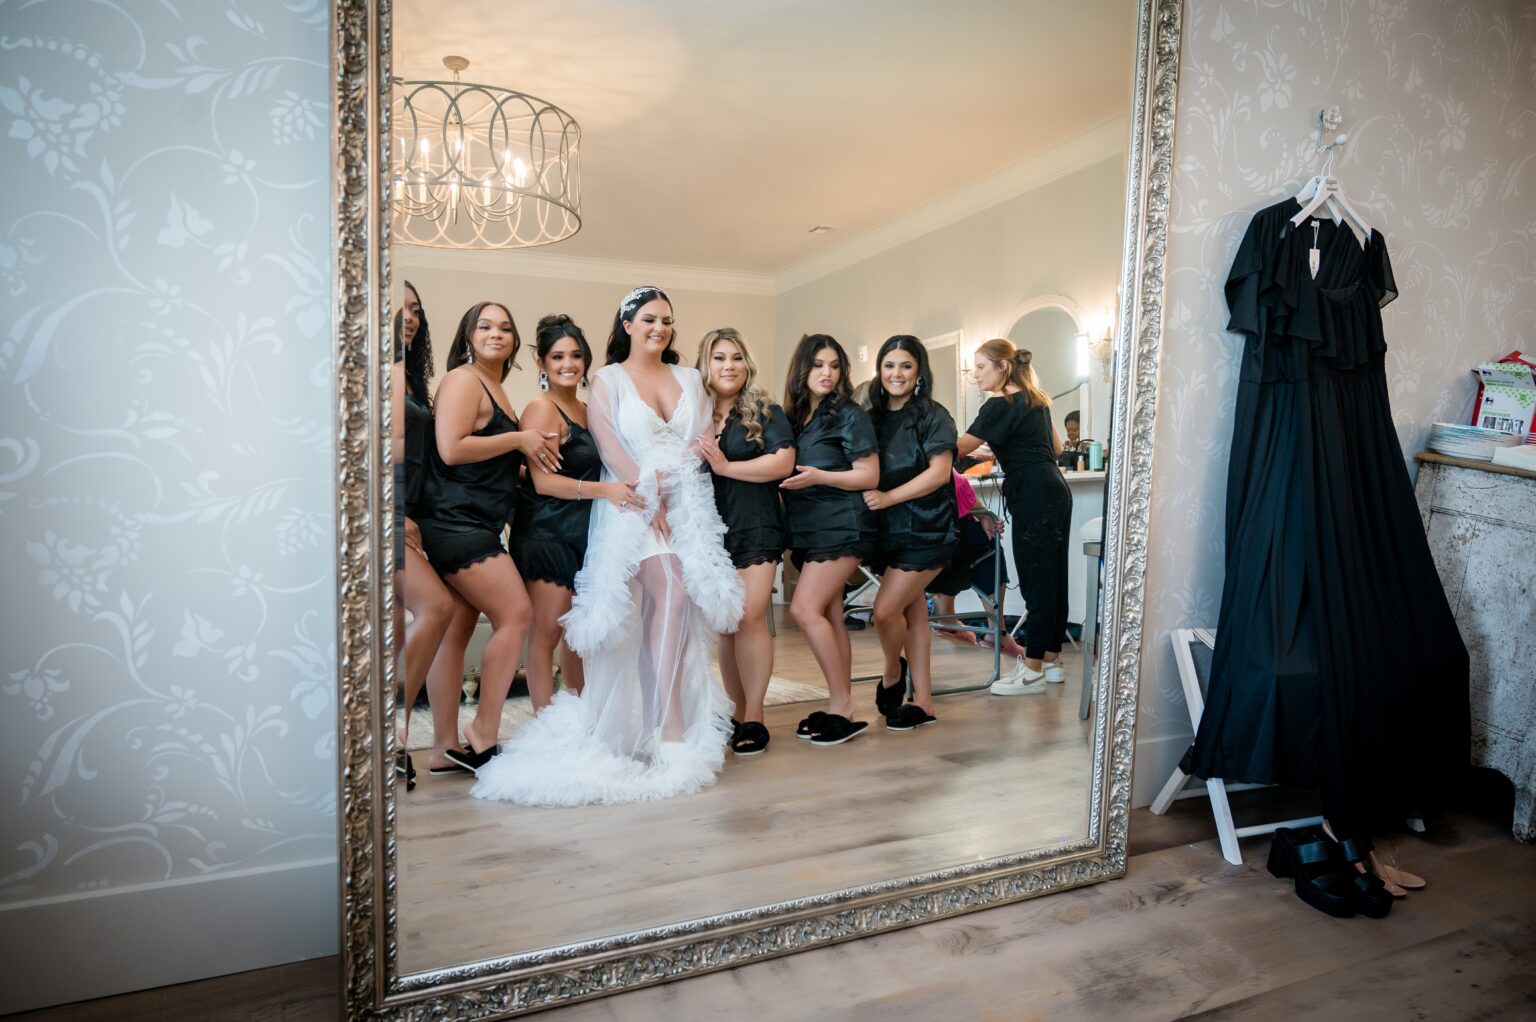 A group of women standing in front of a mirror.